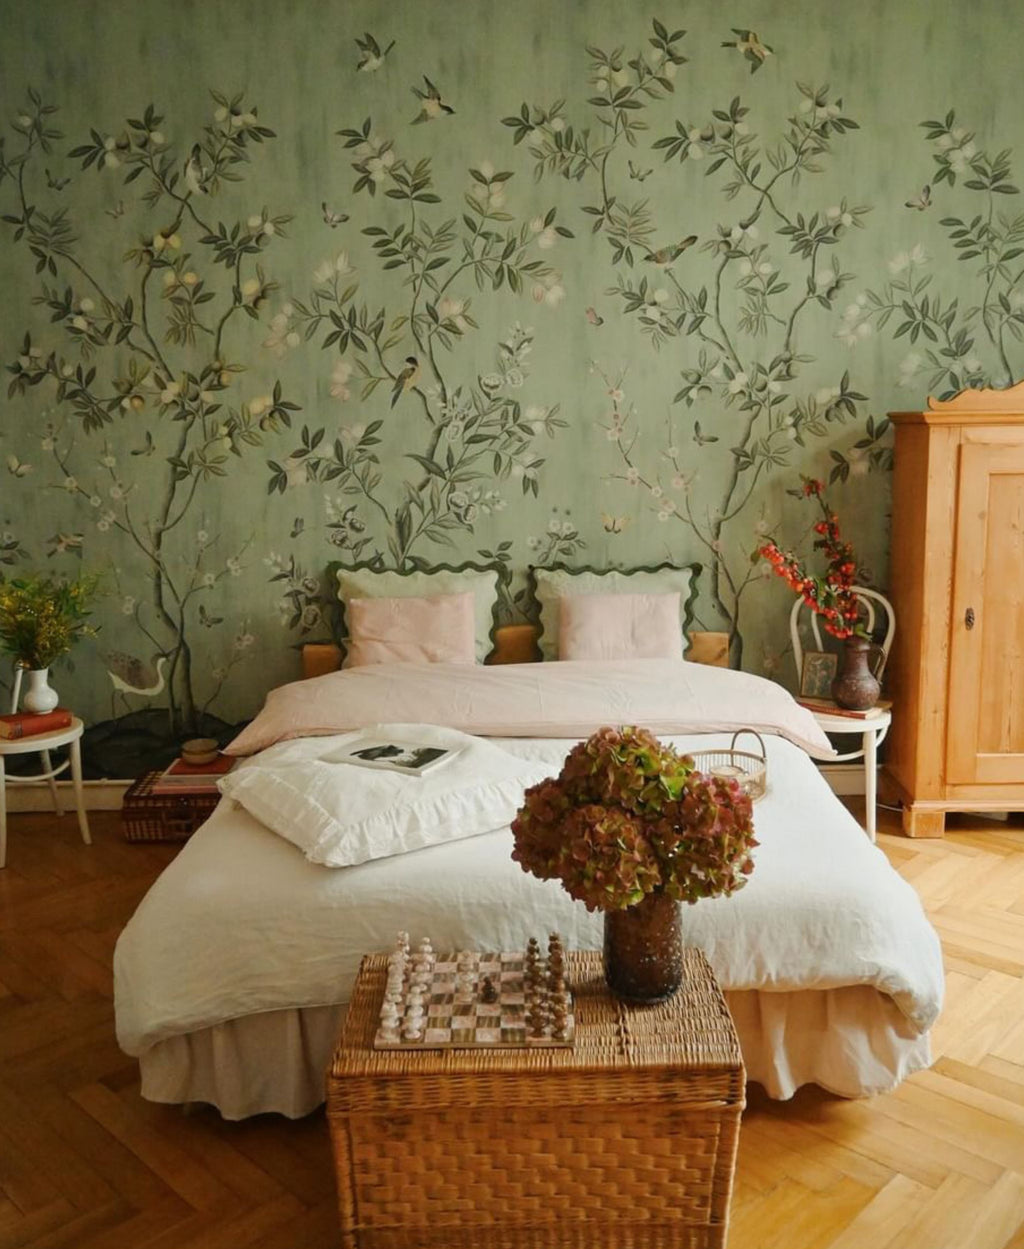 Diane Hill's 'Chinoiserie Chic' wallpaper design for Rebel Walls featured in influencer Tim Labenda home